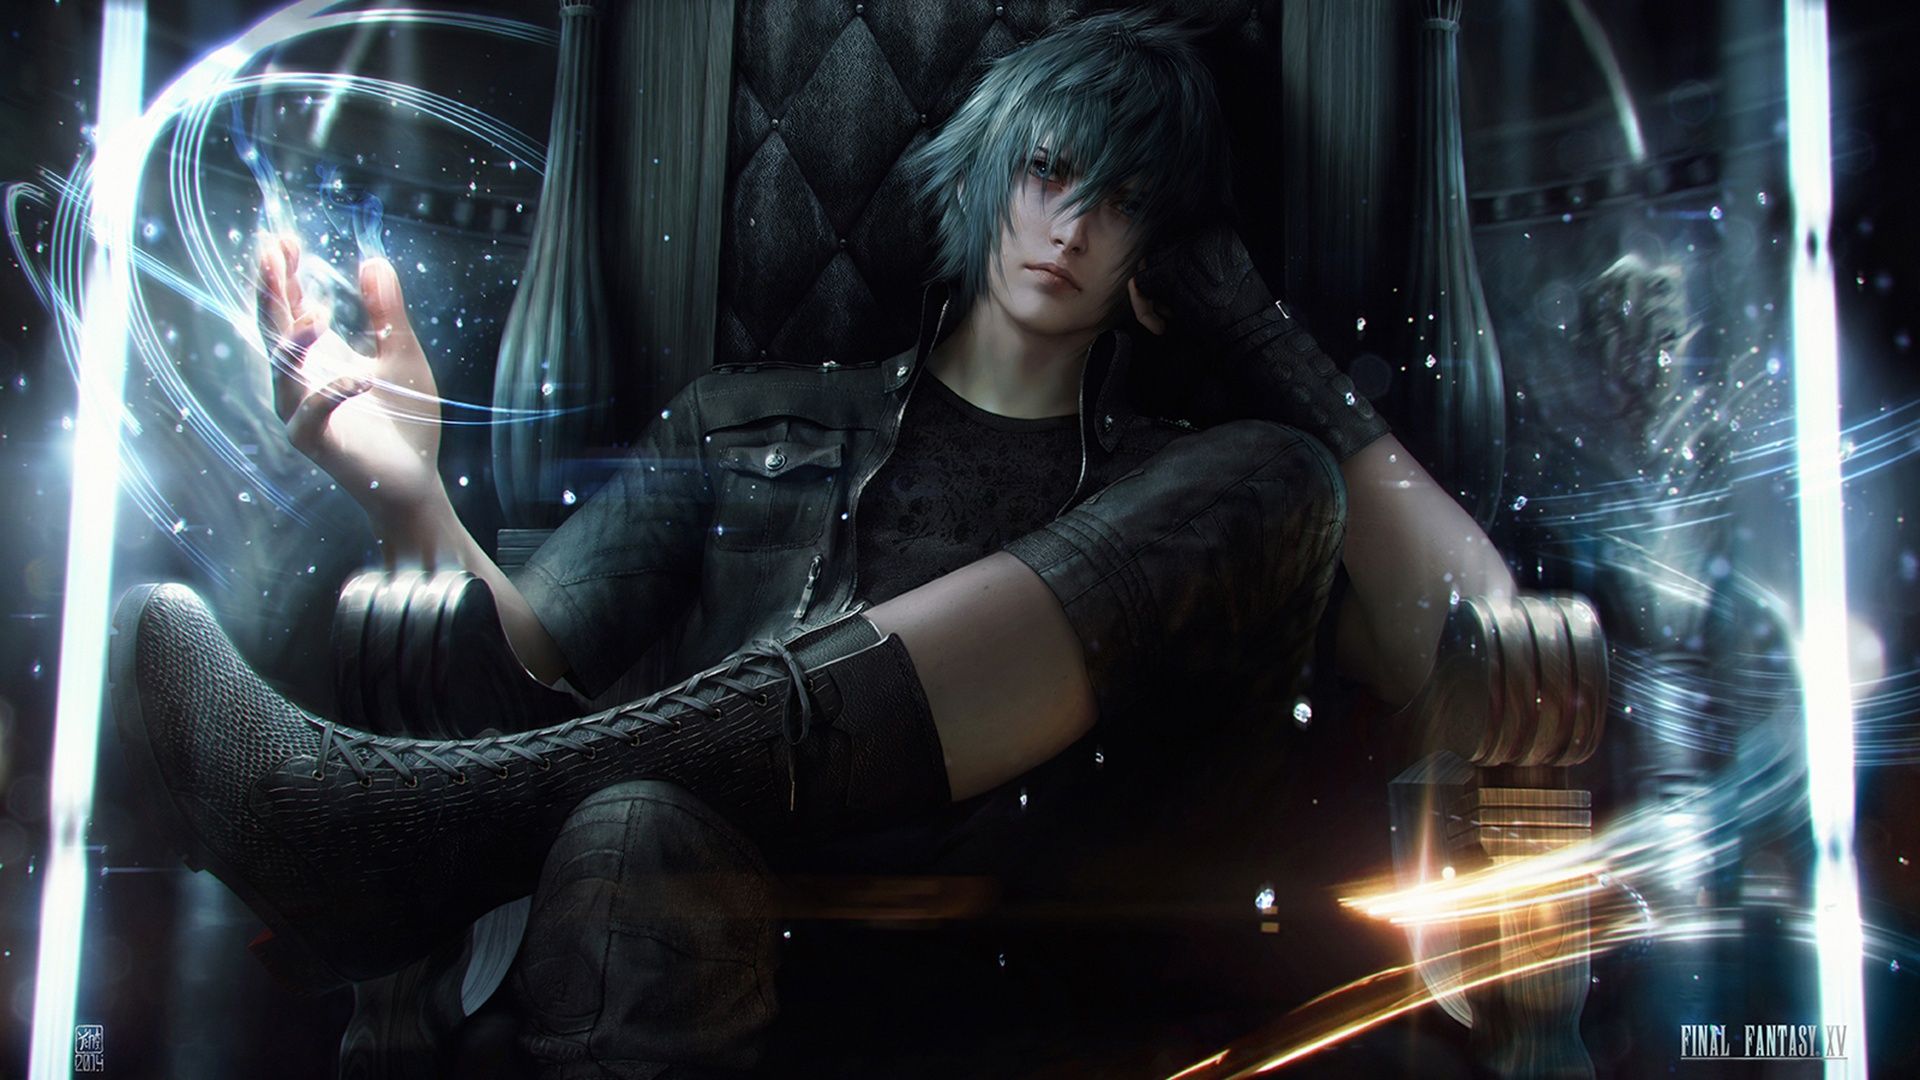 Final Fantasy XV Wallpaper Image Photo Picture Background